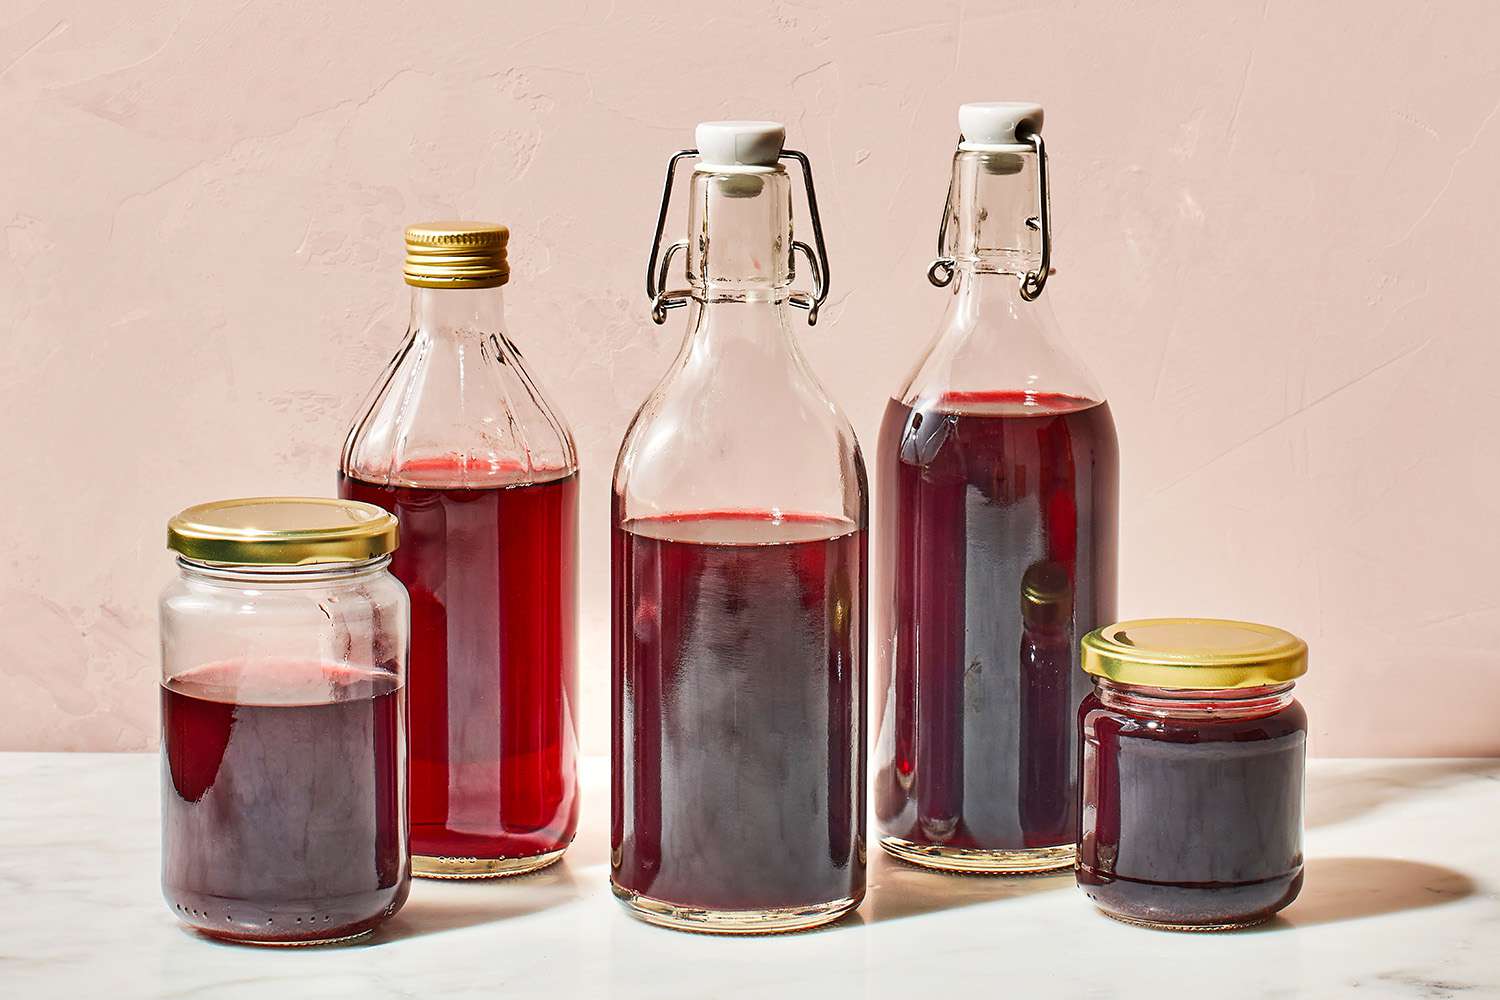 Red Wine Vinegar Alcohol Content: What You Need to Know